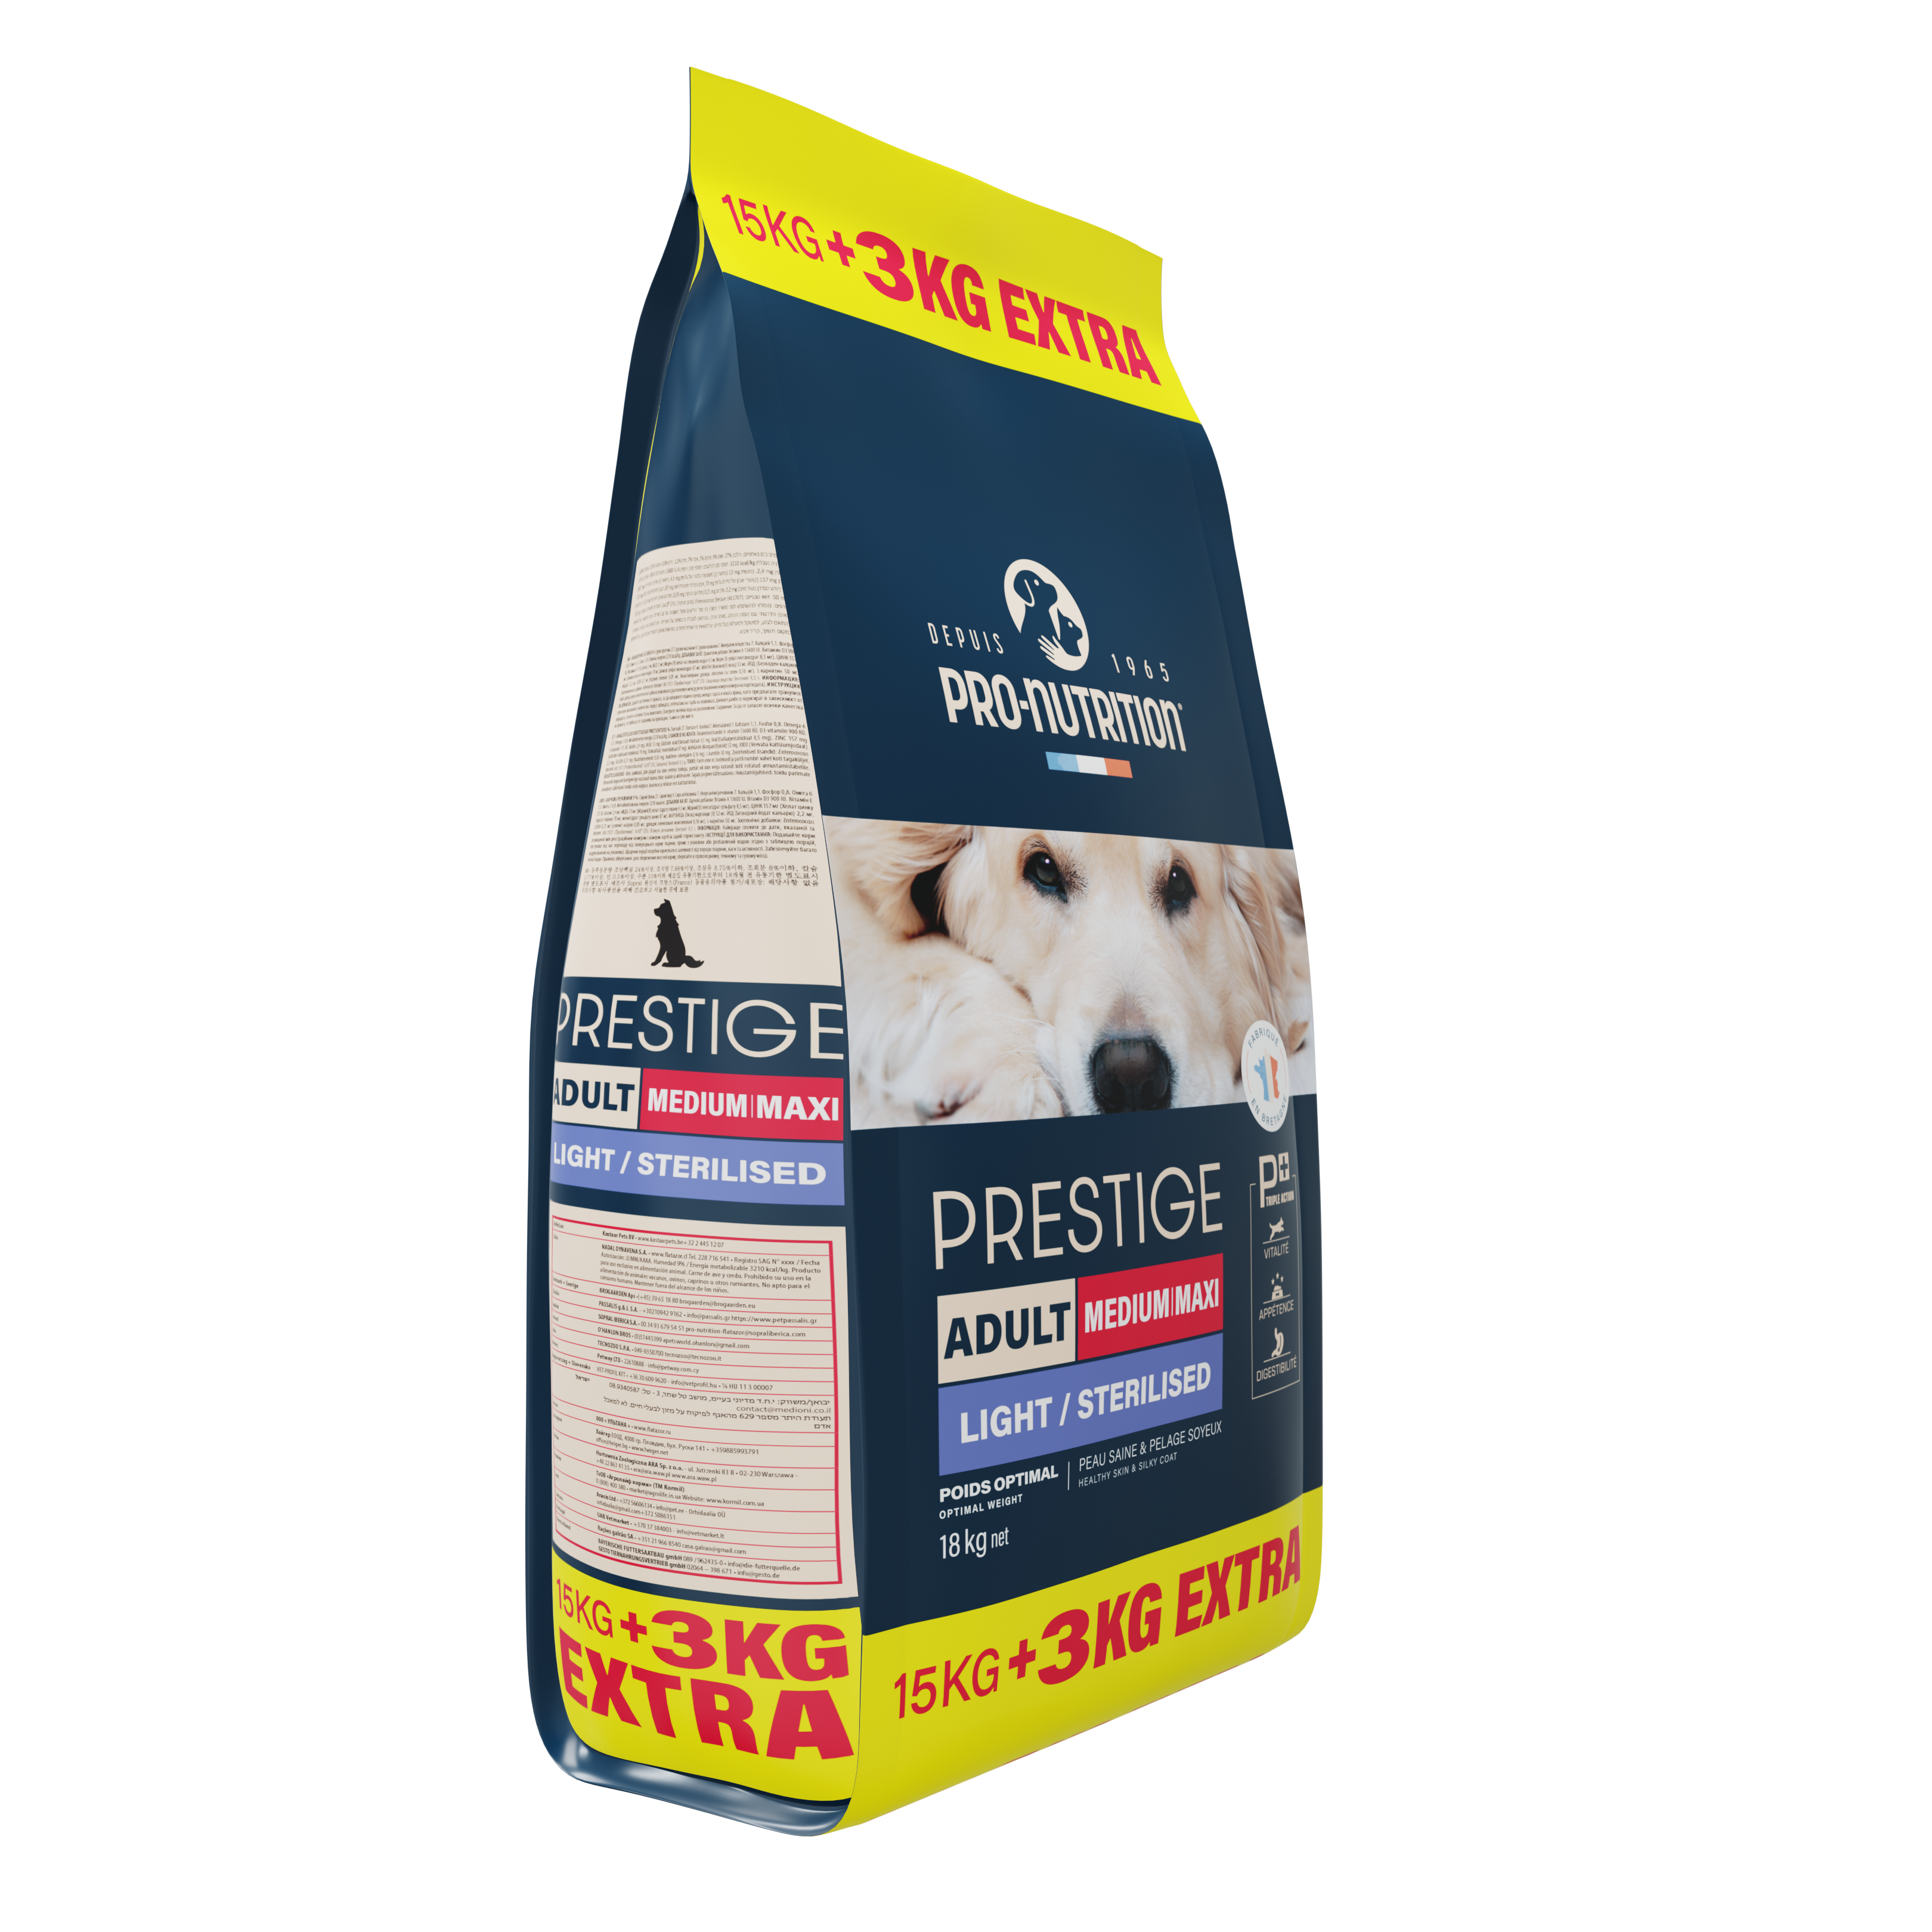 Reduced fat food for adult dogs 18 kilograms